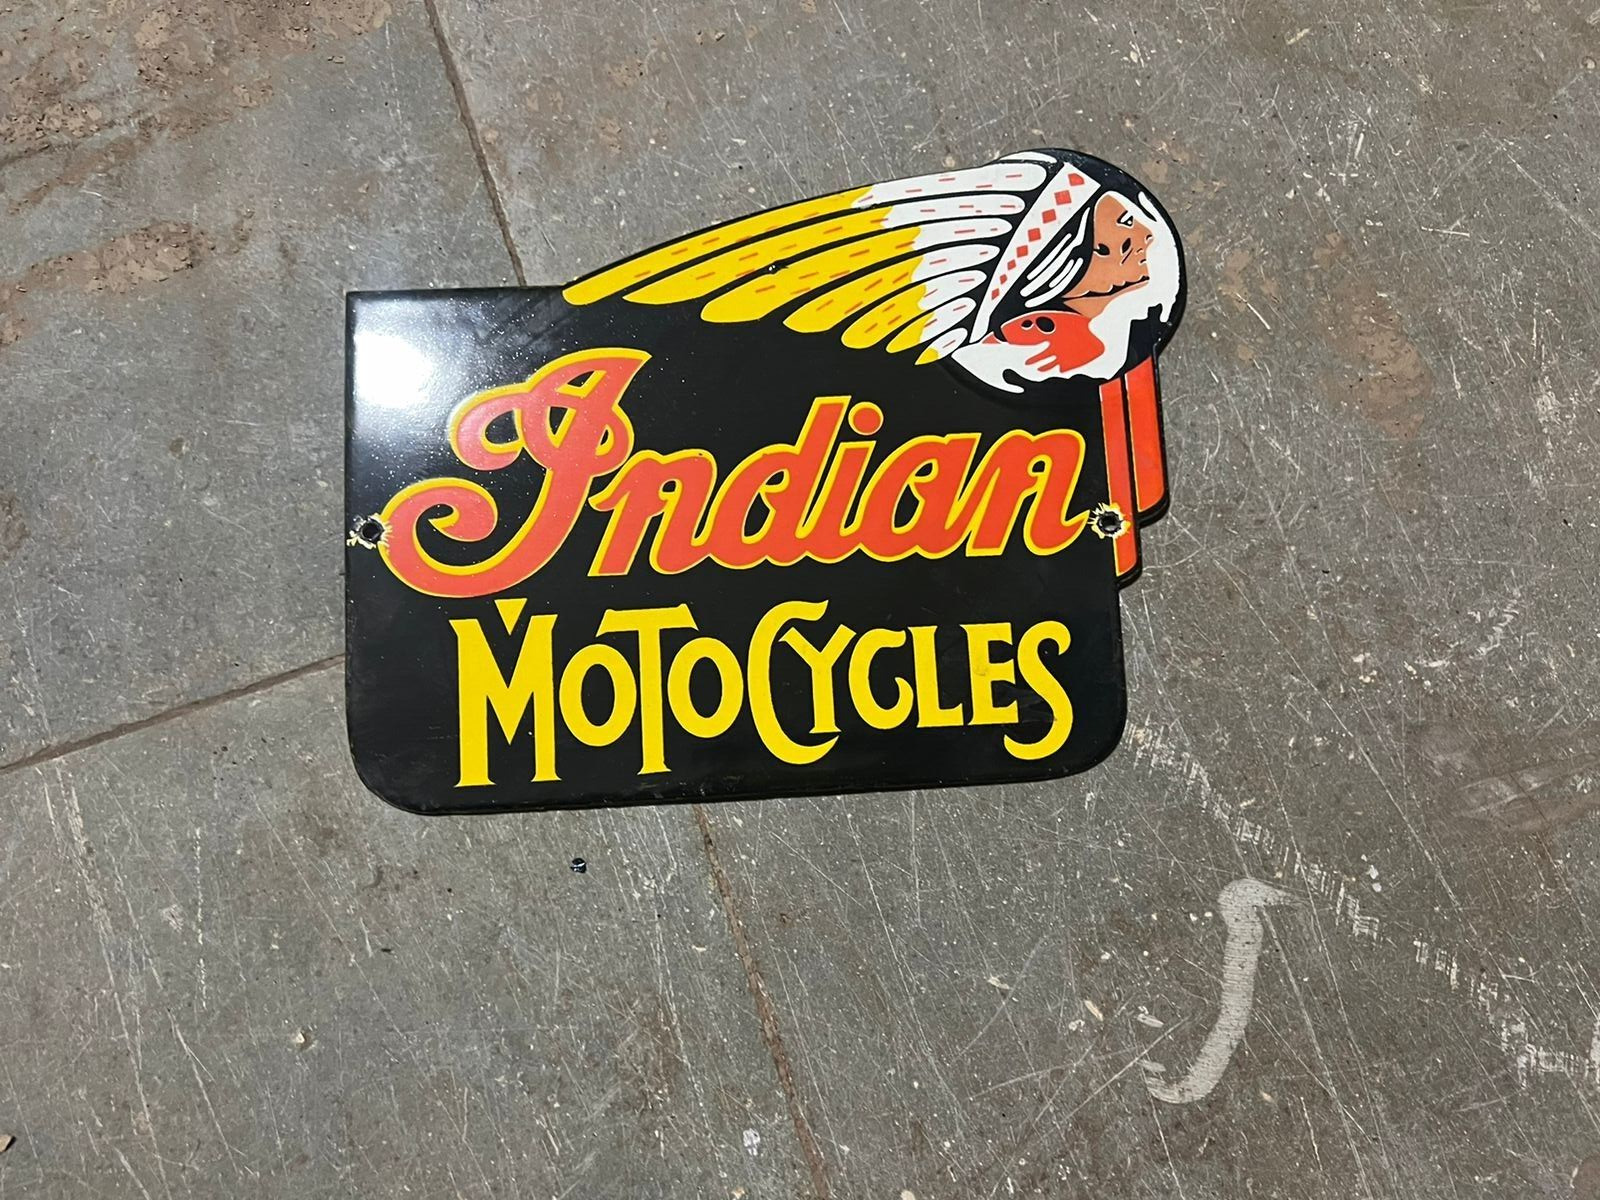 INDIAN MOTORCYCLES PORCELAIN ENAMEL SIGN 10X8 INCHES